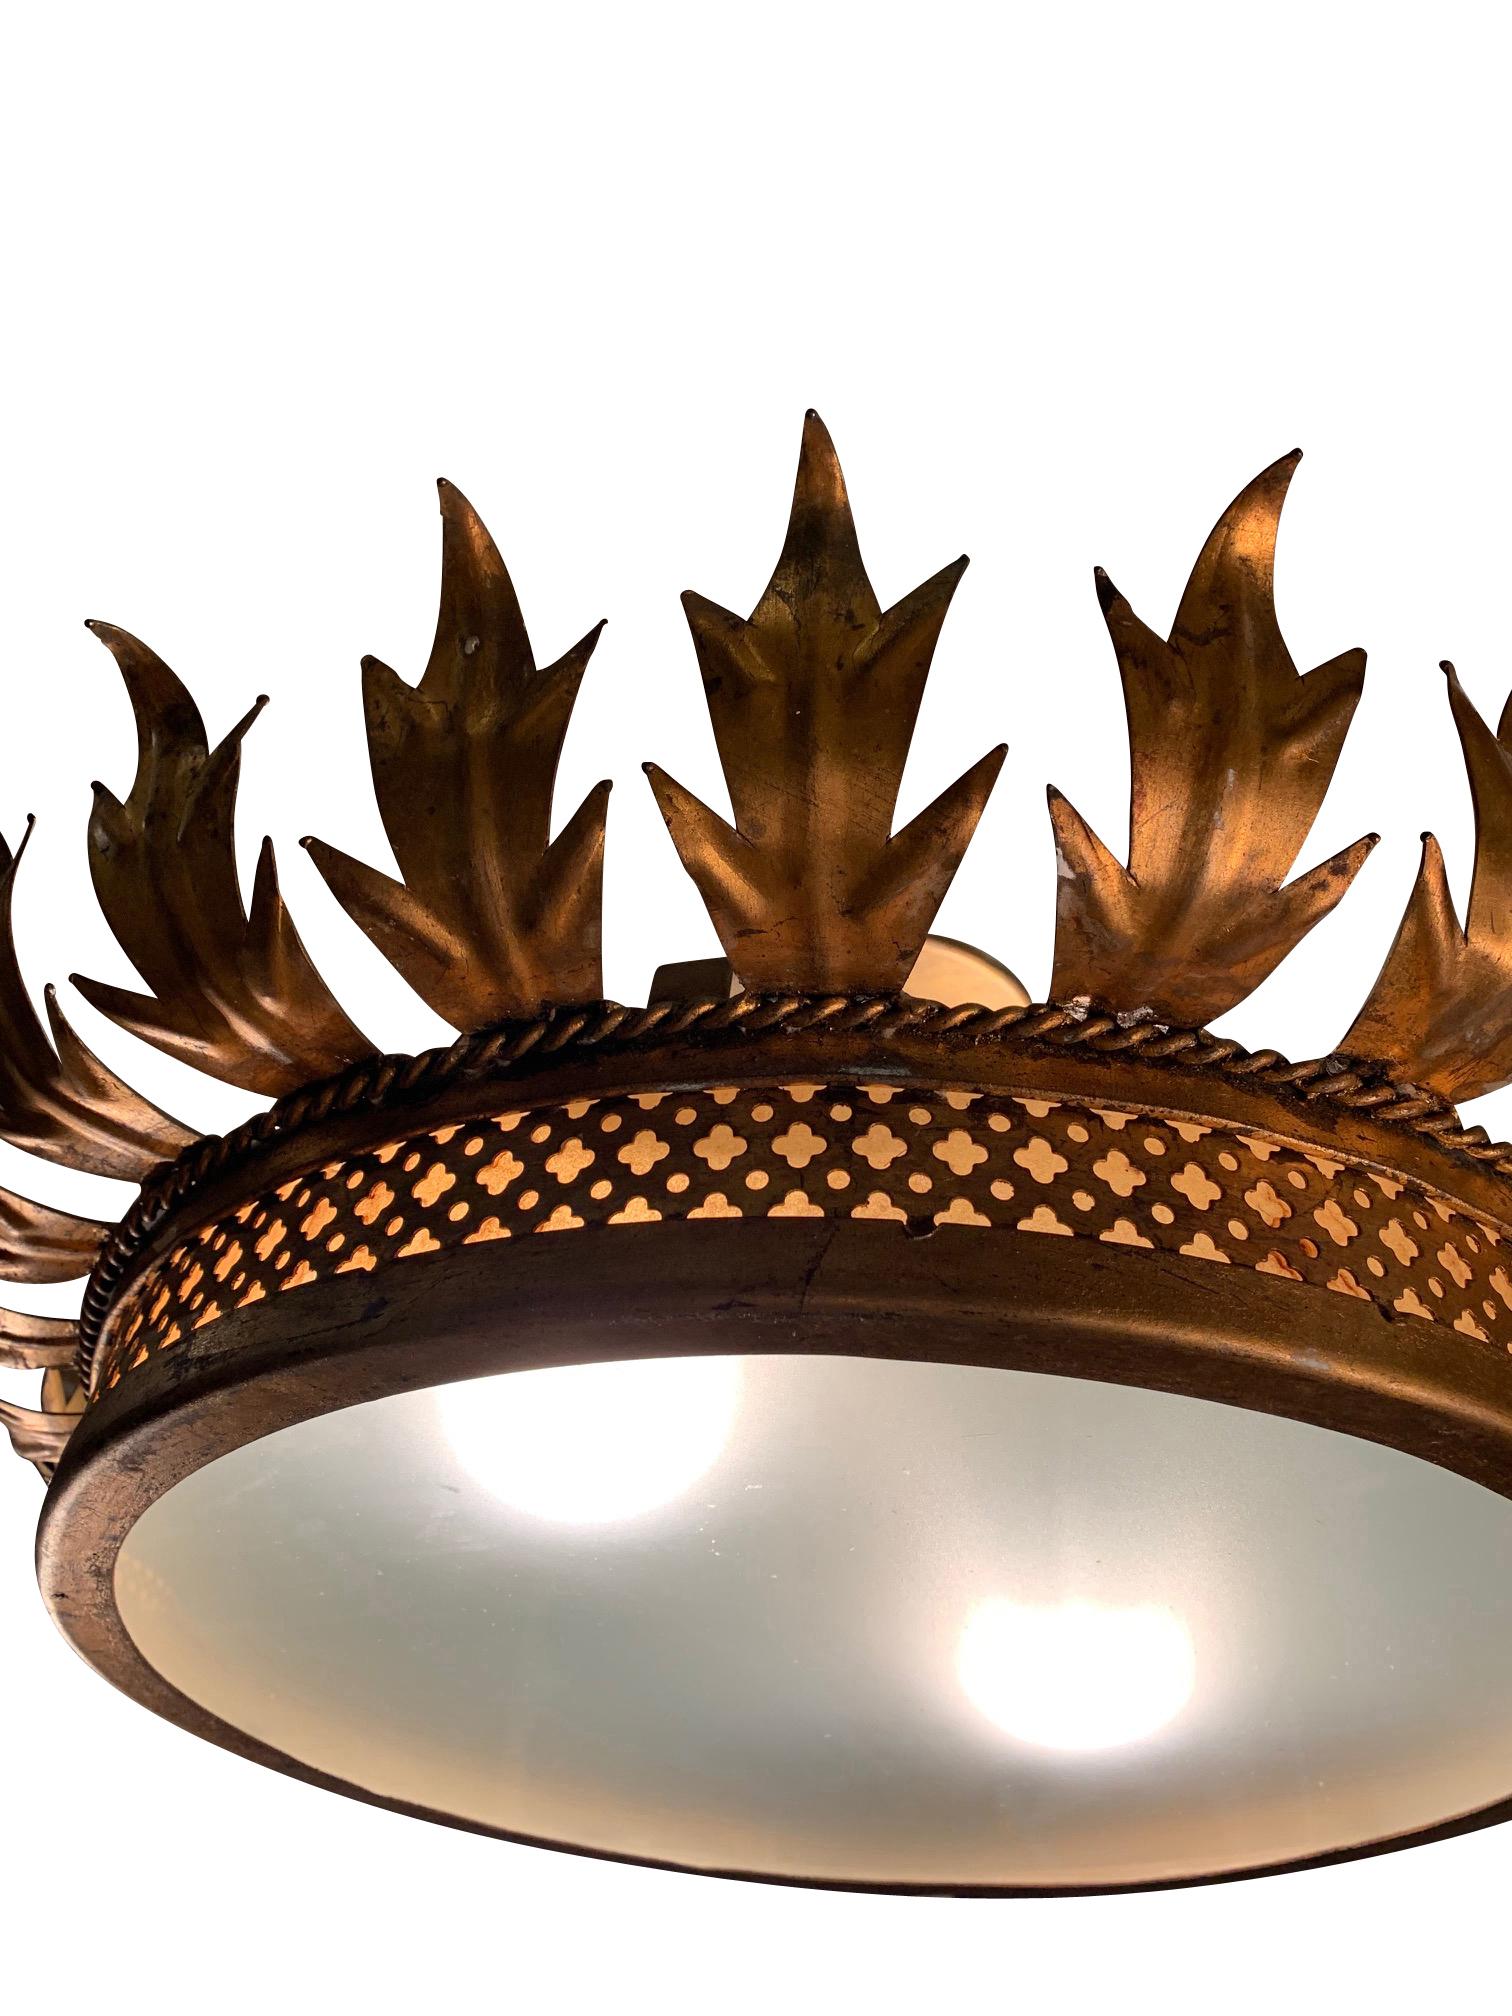 Classic midcentury Spanish gold gilt metal crown chandelier
Acanthus leaf design
Newly rewired.